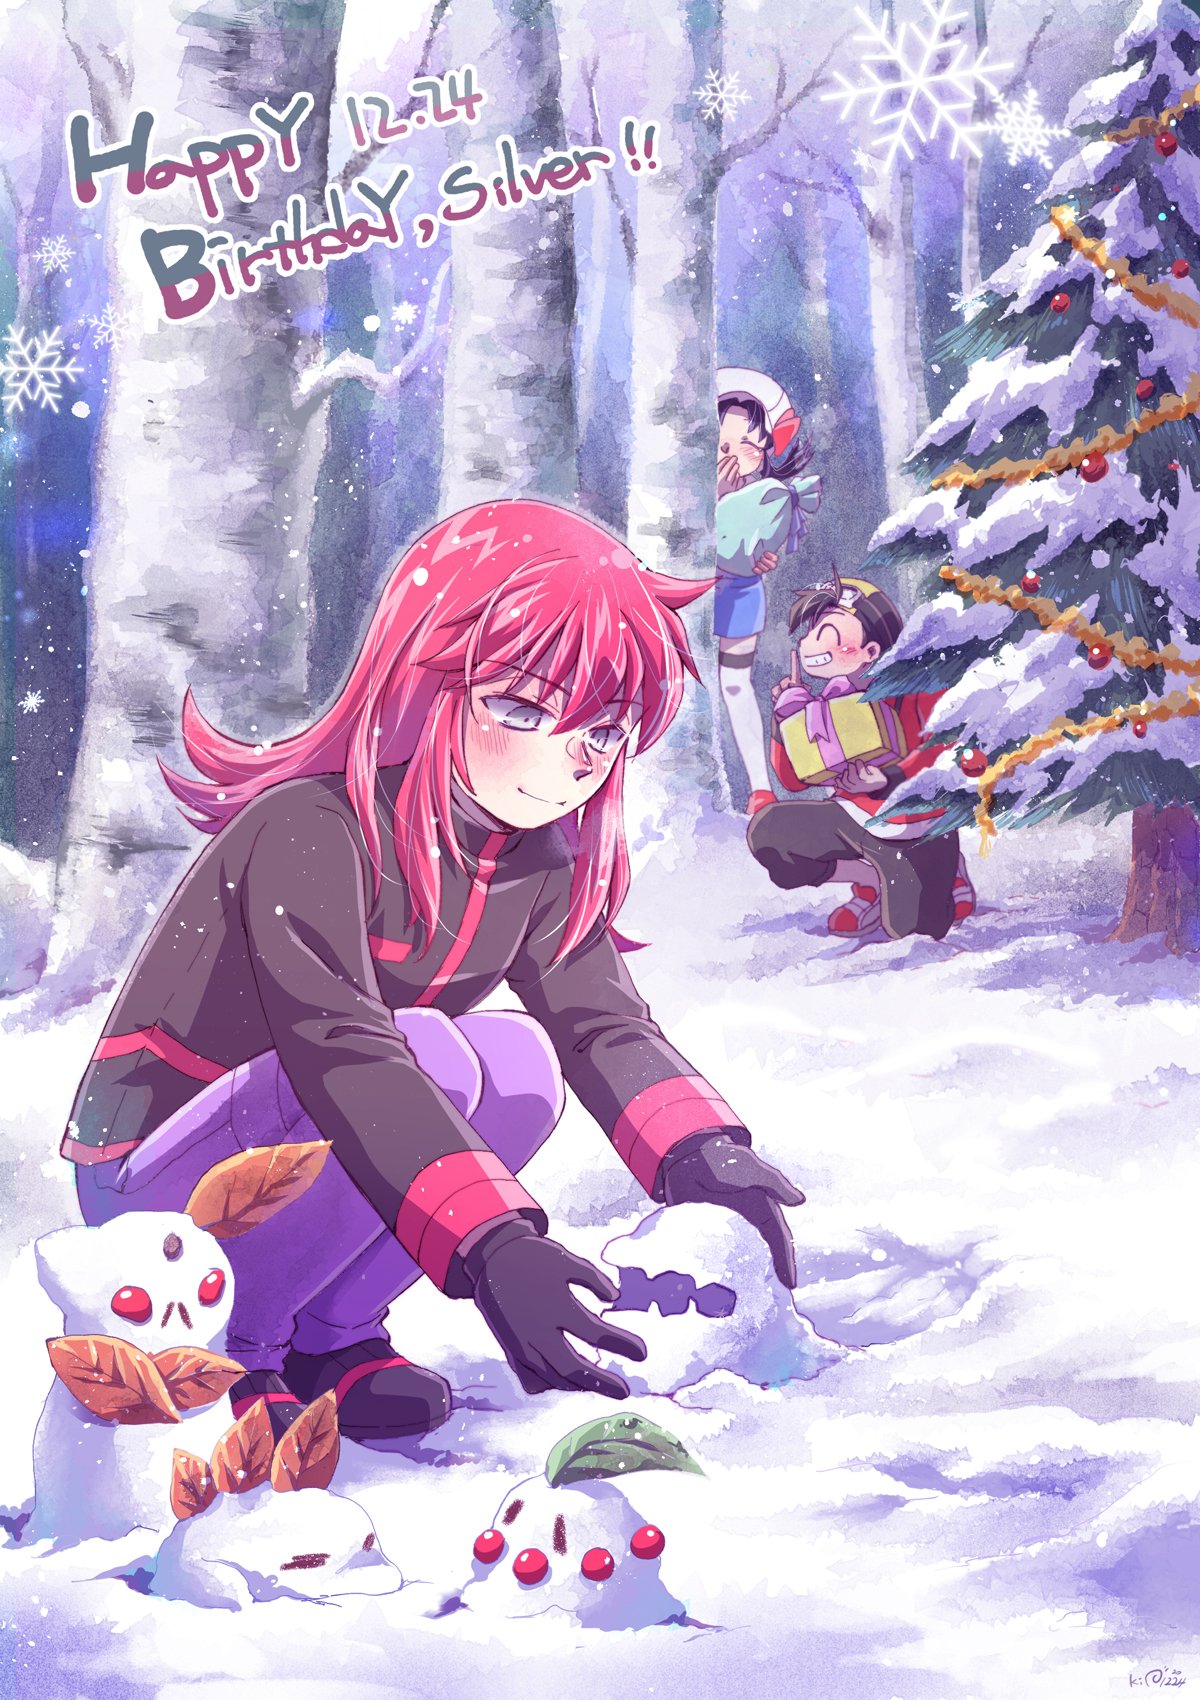 1girl 2boys bangs bare_tree blush box capri_pants character_name christmas_tree closed_mouth commentary_request covering_mouth dated ethan_(pokemon) eyebrows_visible_through_hair finger_to_mouth gift gift_box gloves grey_eyes happy_birthday hat highres holding index_finger_raised kipam kris_(pokemon) light_smile long_hair multiple_boys outdoors pants peeking_out pink_hair pokemon pokemon_(game) pokemon_hgss purple_pants shoes shushing silver_(pokemon) snow snow_sculpture snowflakes squatting standing thigh-highs tree white_headwear